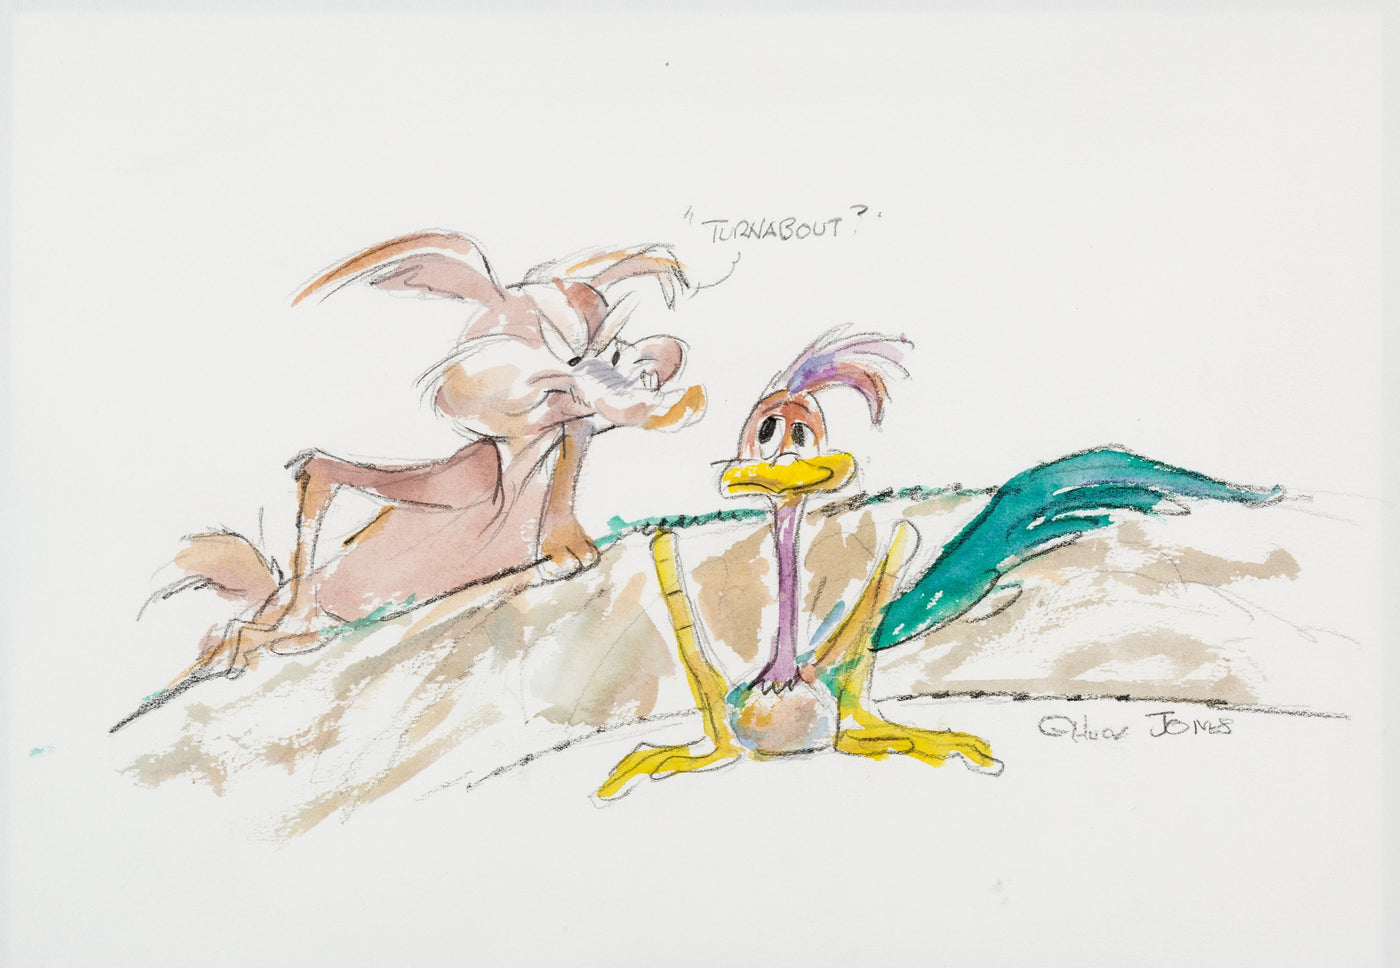 Original Chuck Jones Watercolor "Turnabout?" featuring Wile E. Coyote and Roadrunner